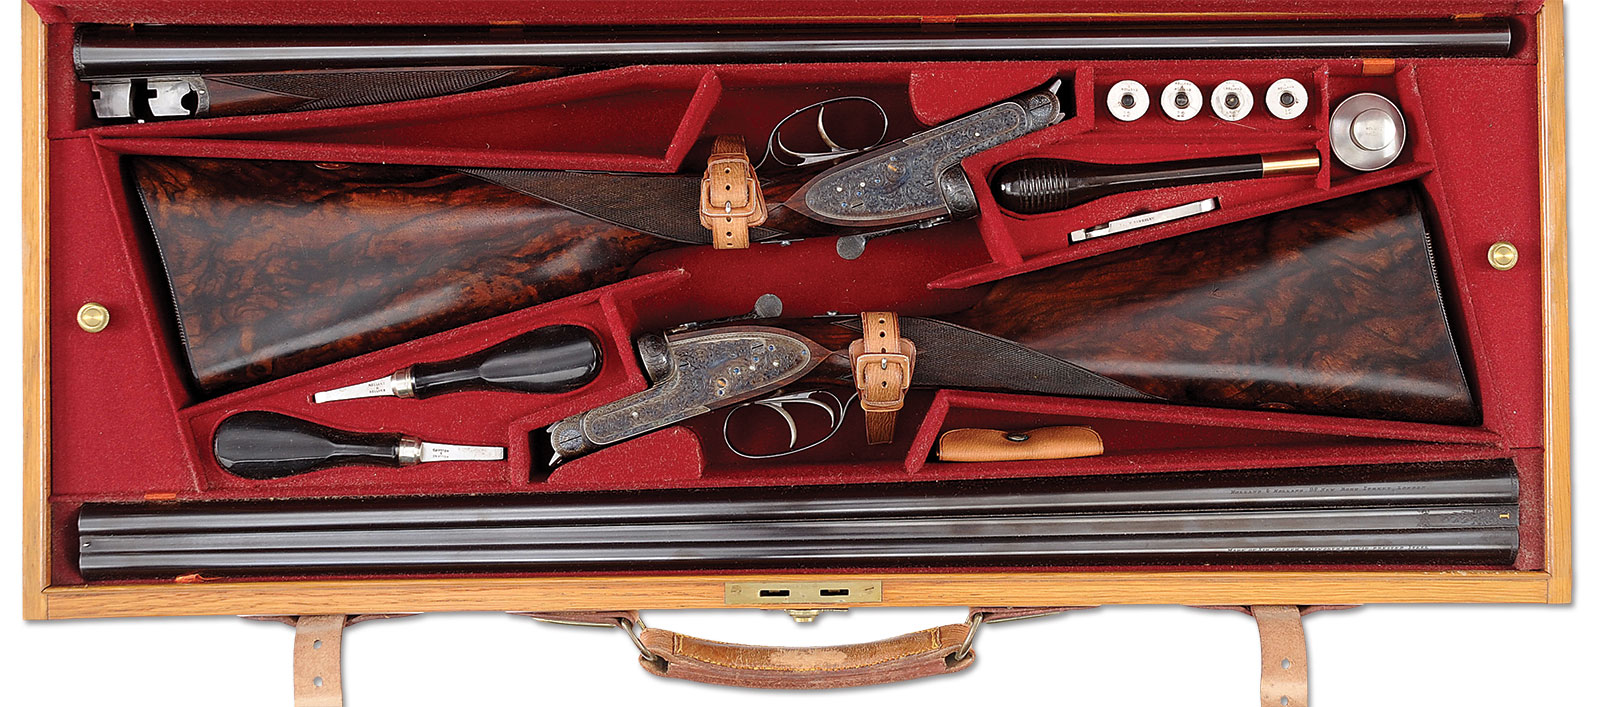 Extraordinary True Pair of Holland & Holland Royal Ejector 12 Bore Heavy Proof Game Guns in Maker’s Case w/Acc. Made for Nathaniel C. Nash, Cambridge, Mass in 1904